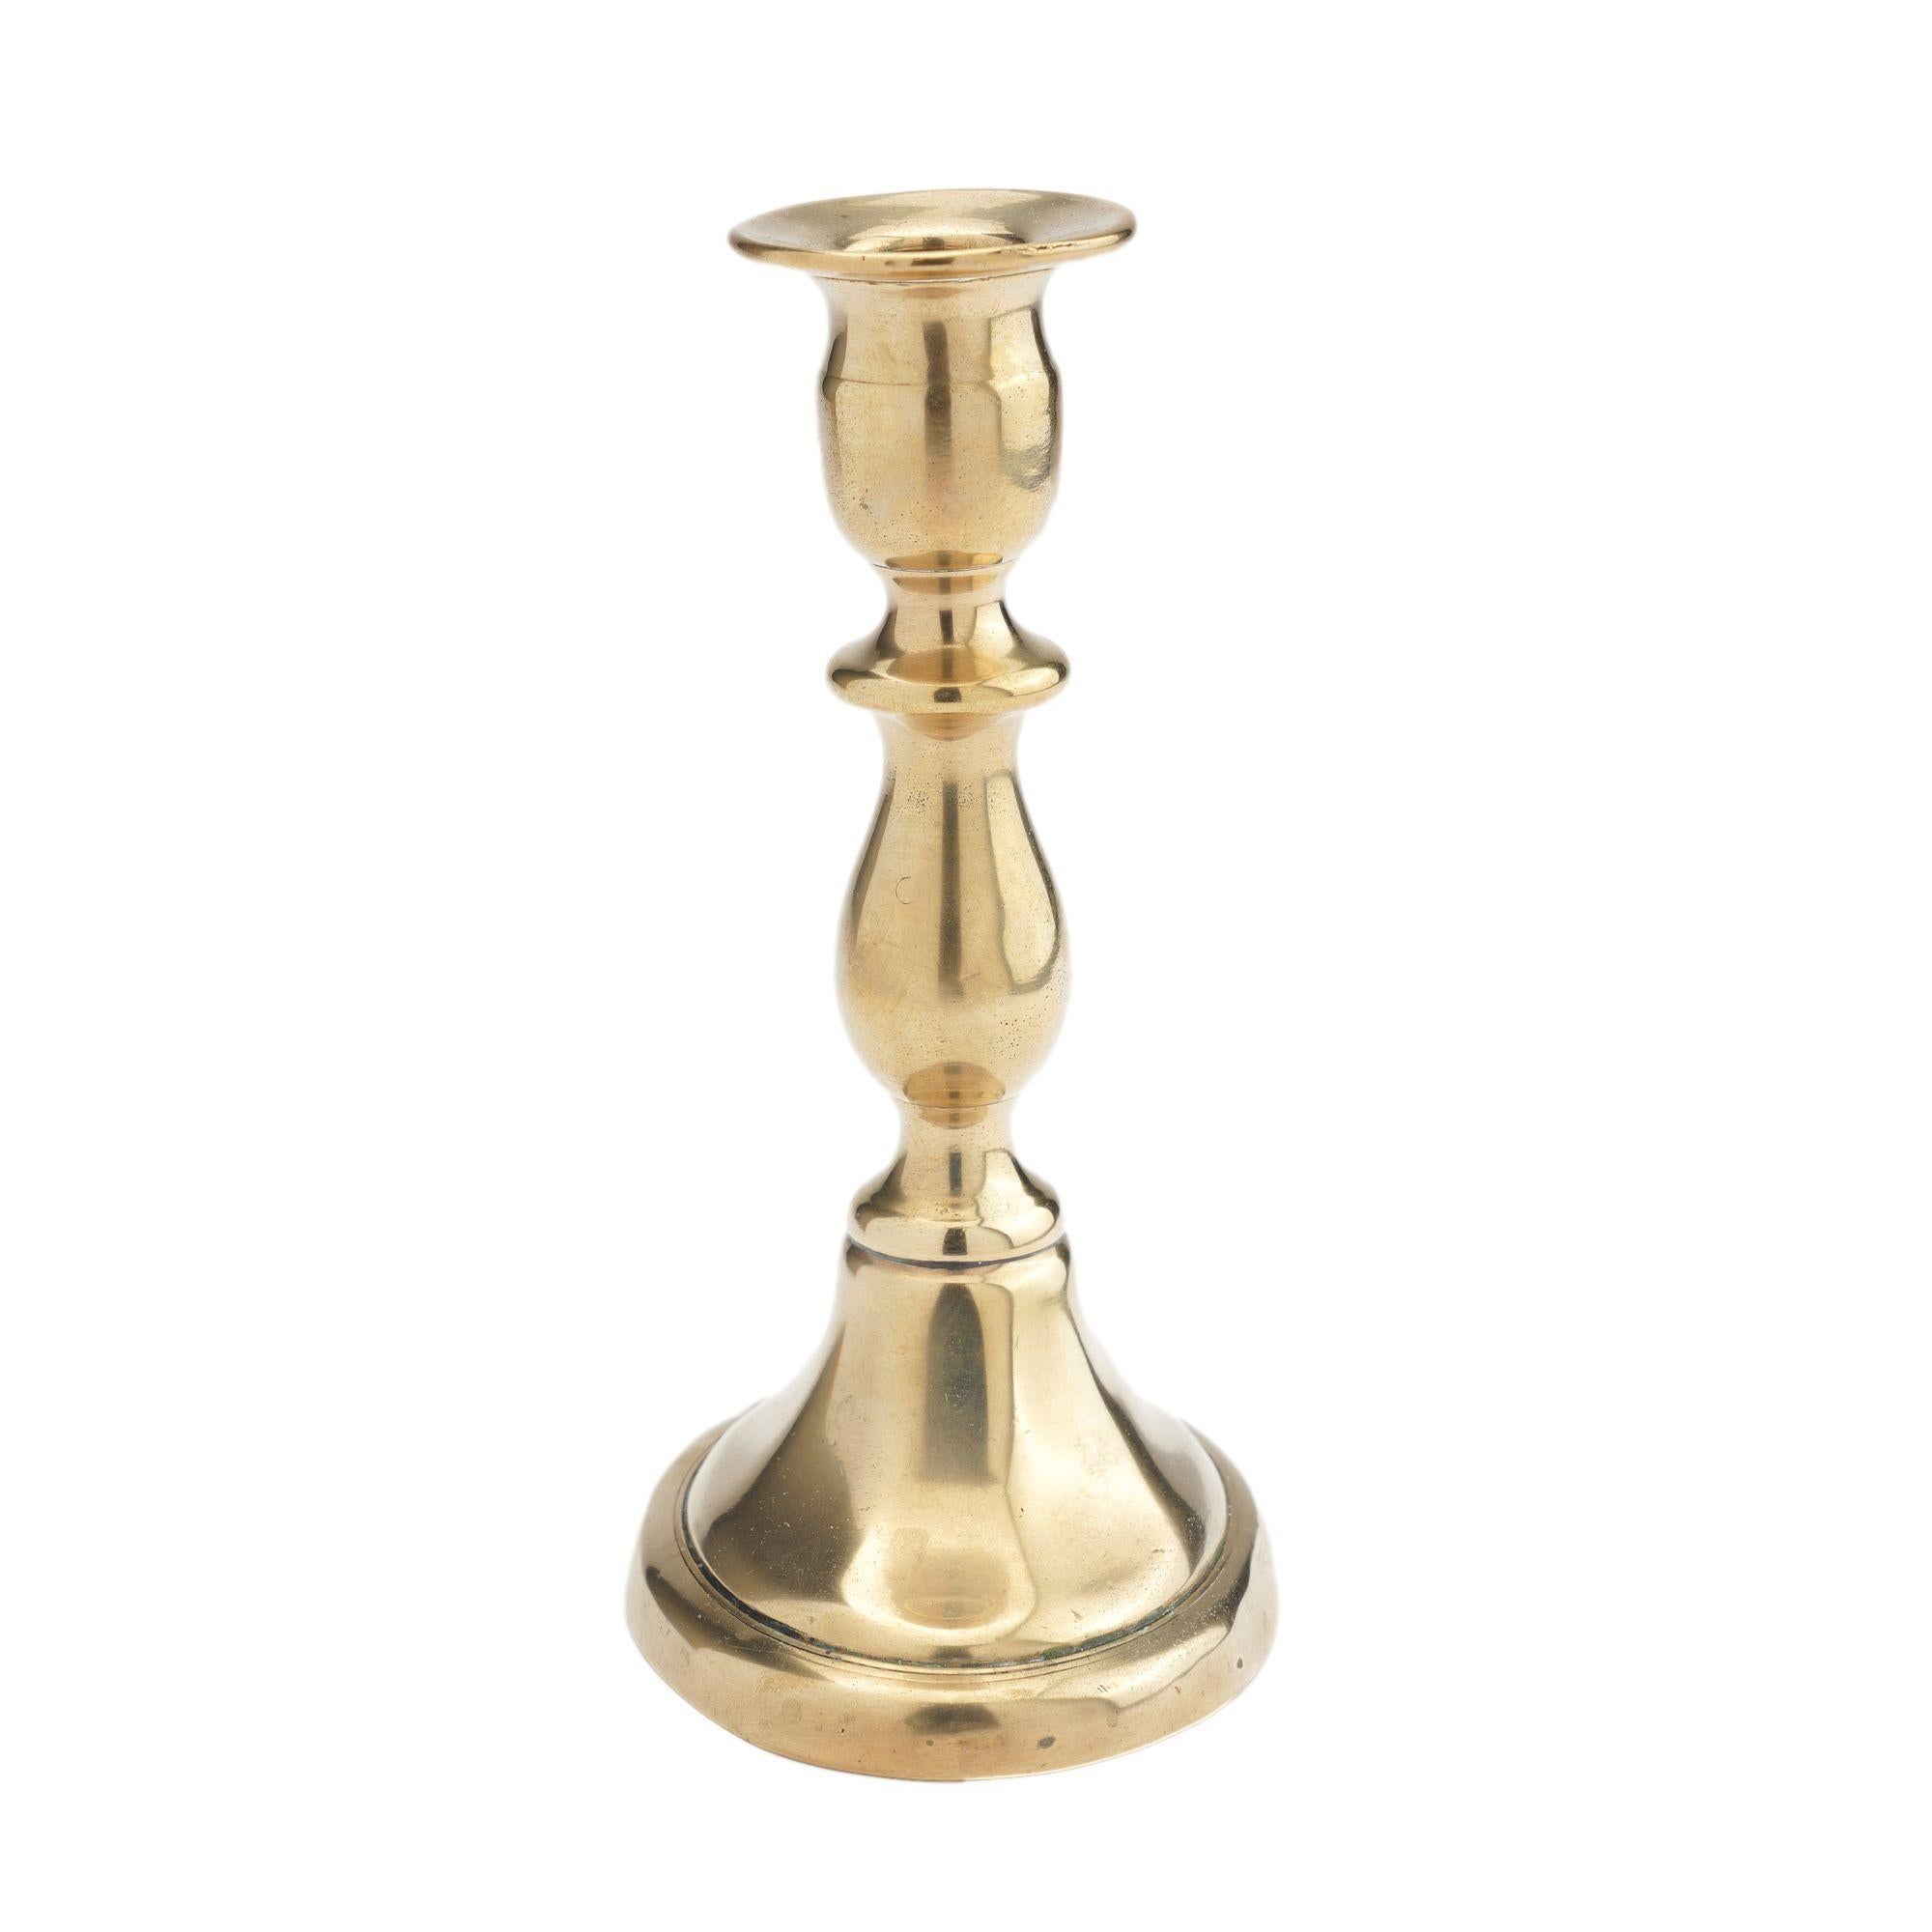 English cast brass oval base candlestick by William A. Harrison, 1791-1818 For Sale 2